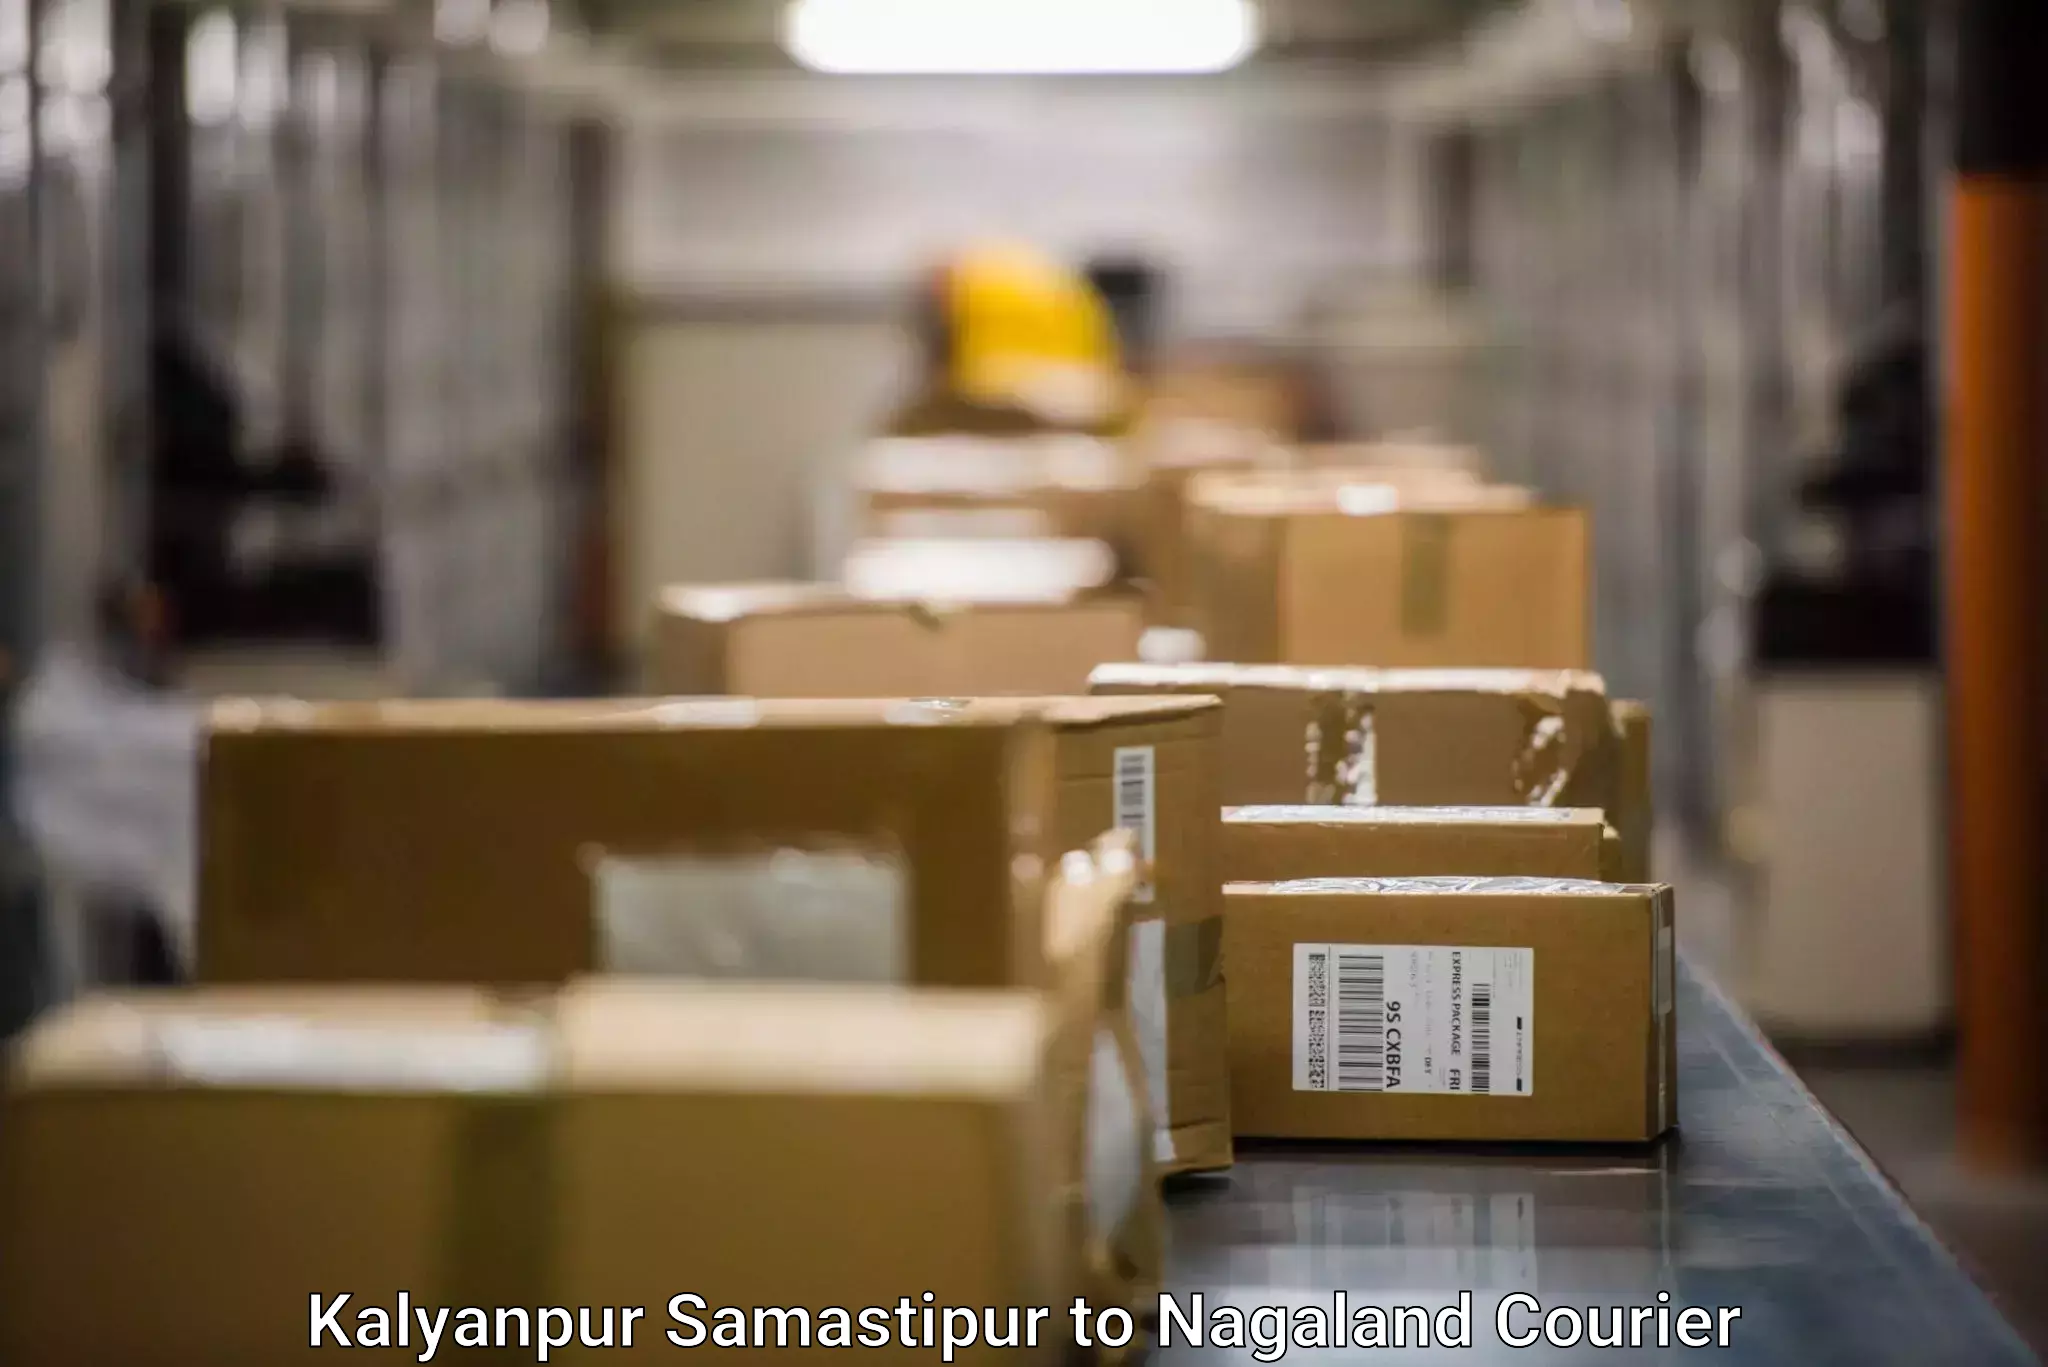 Parcel service for businesses Kalyanpur Samastipur to Dimapur